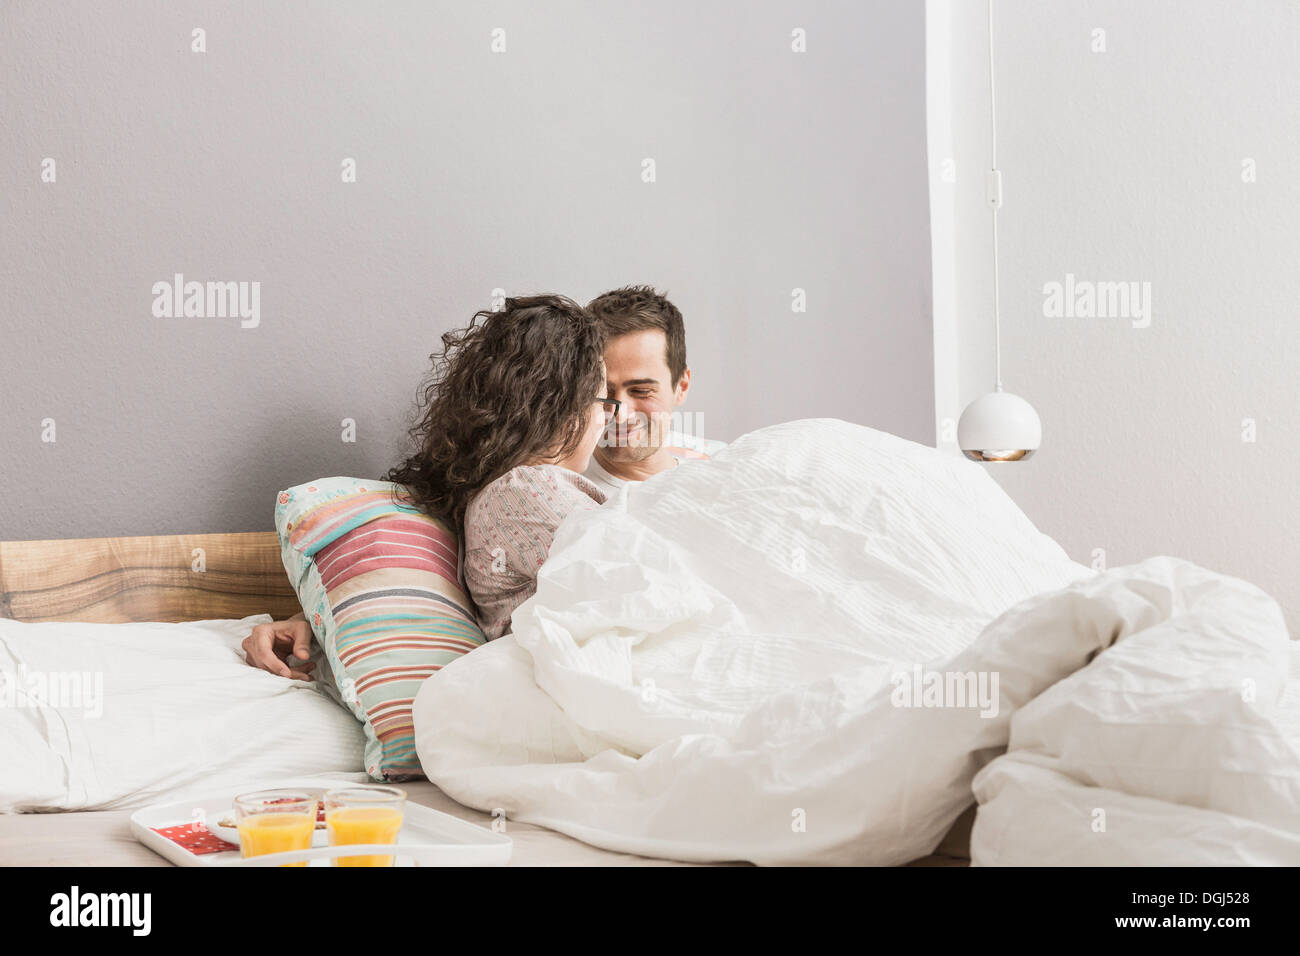 Mid adult couple lying in bed, breakfast on tray Stock Photo